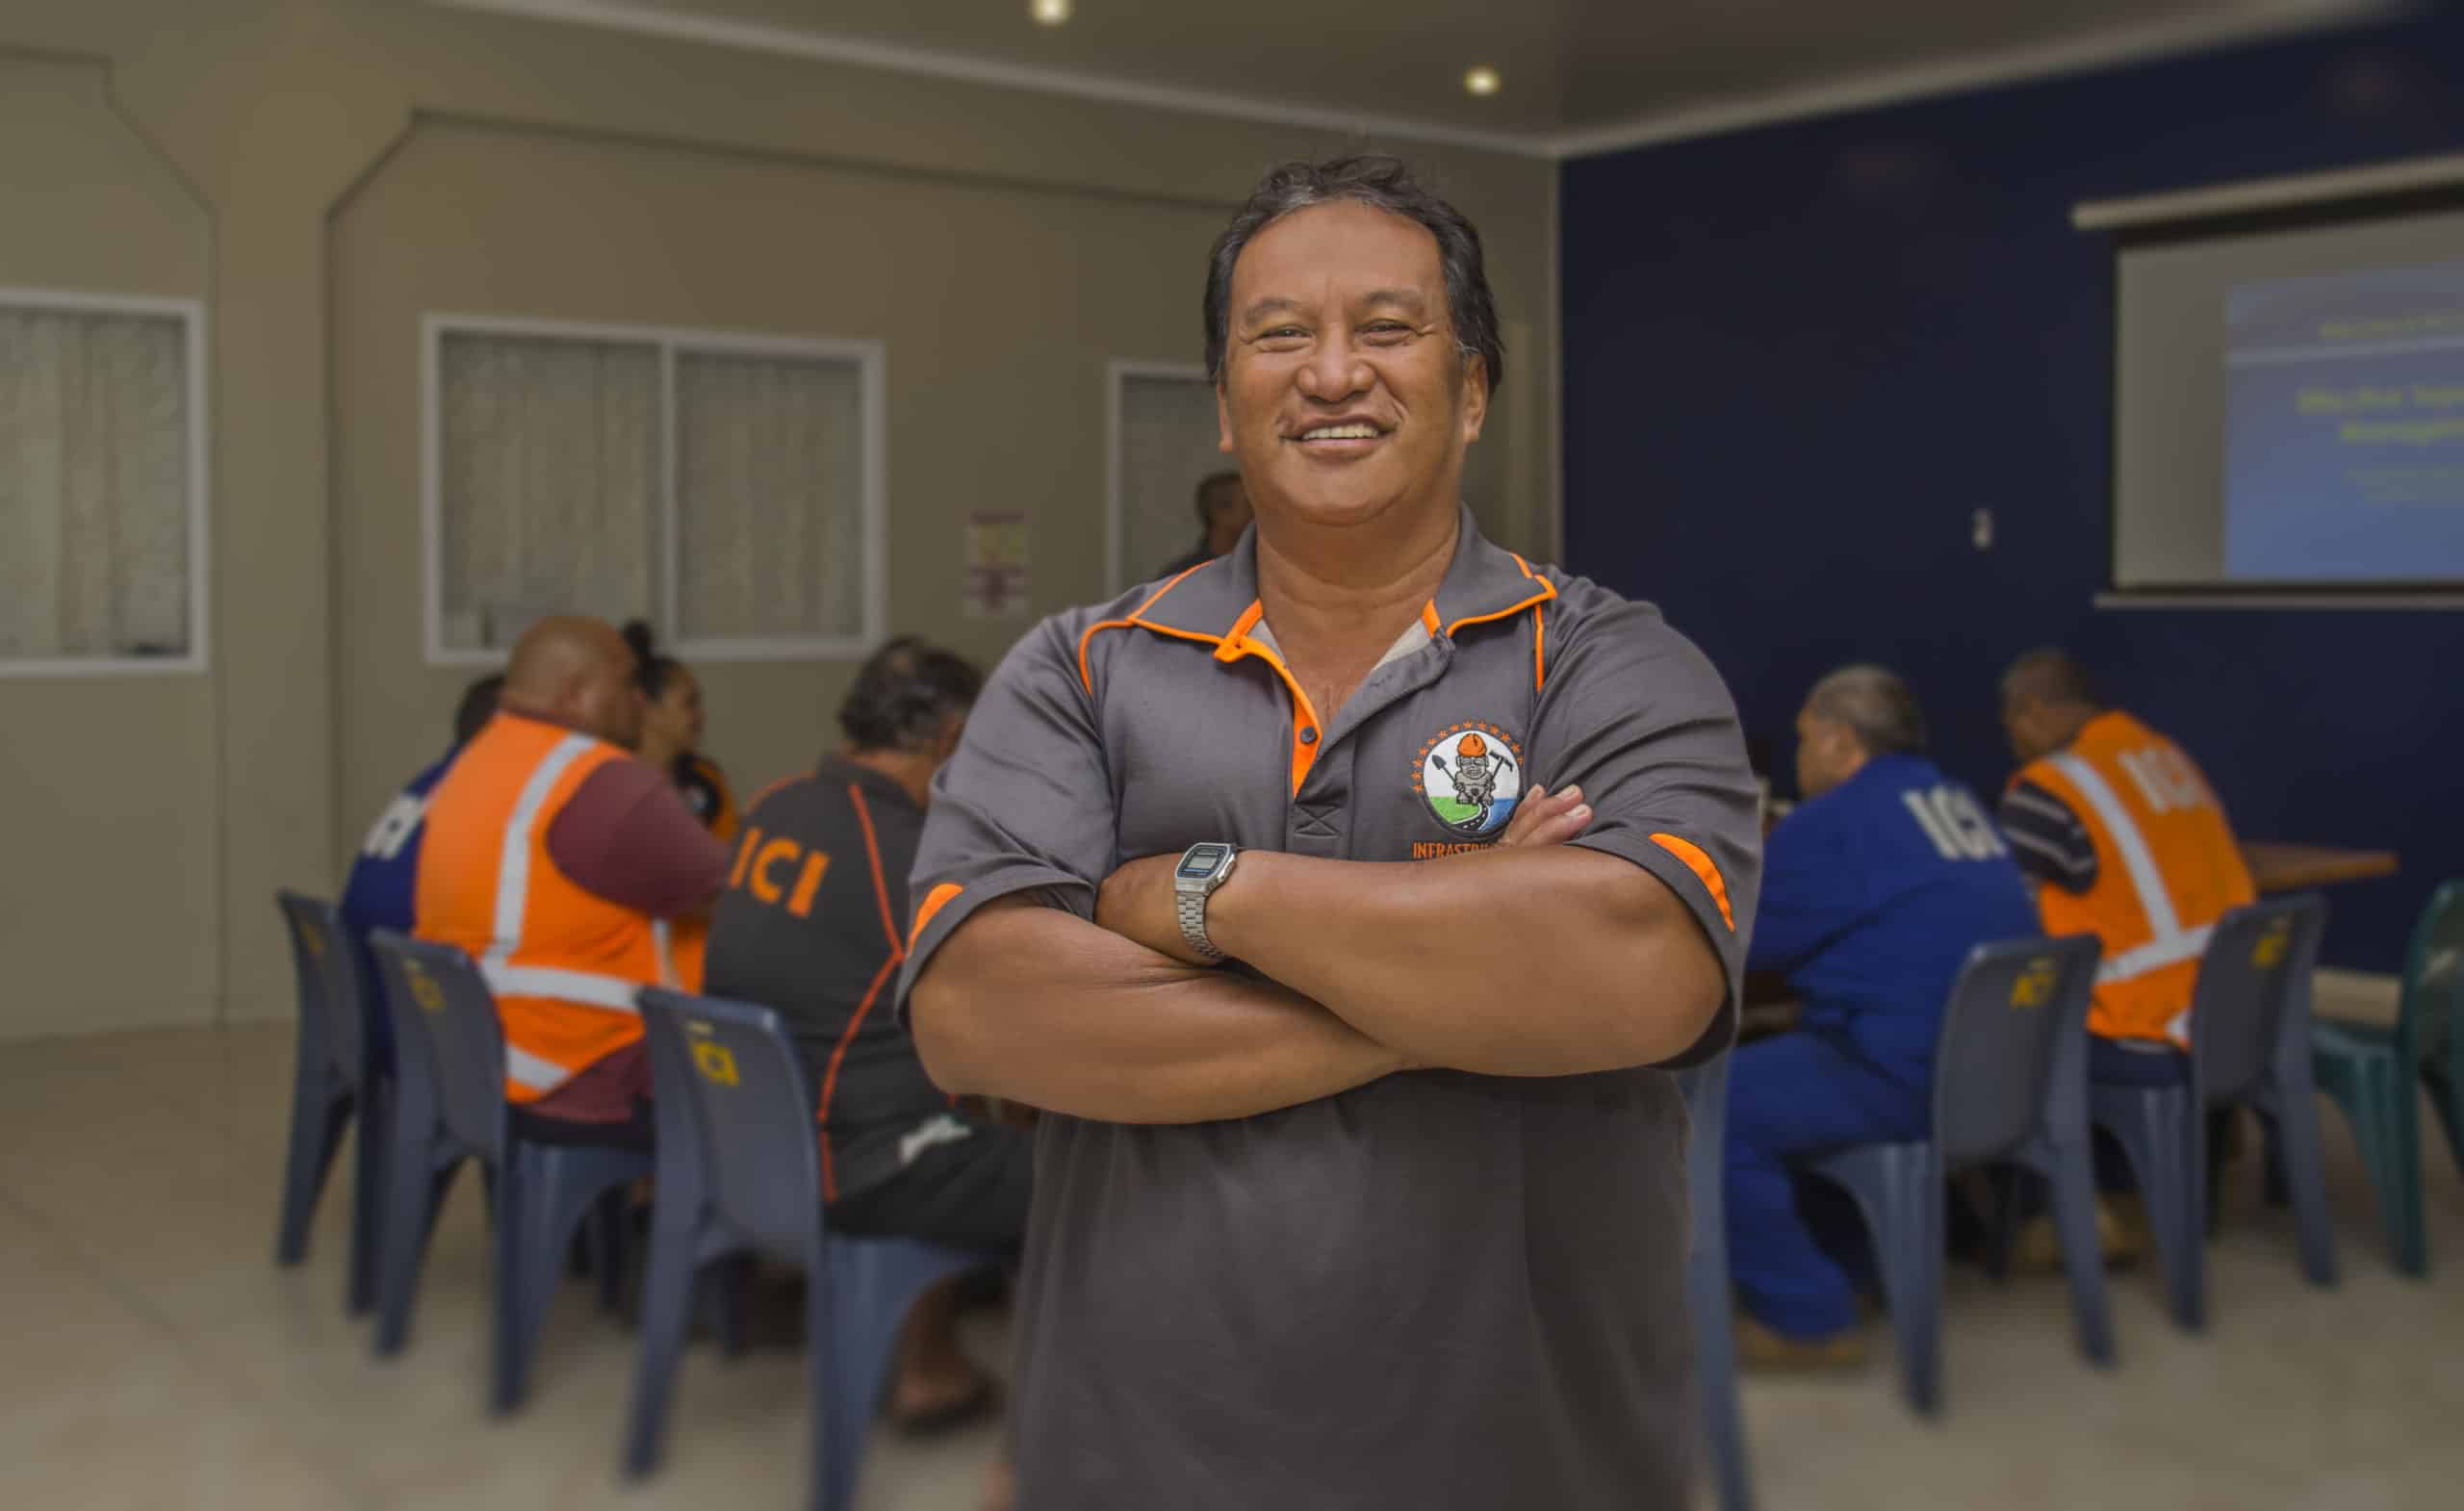 4R'S - REFUSE, REUSE, REDUCE & RECYCLE - The Ministry of Infrastructure  Cook Islands